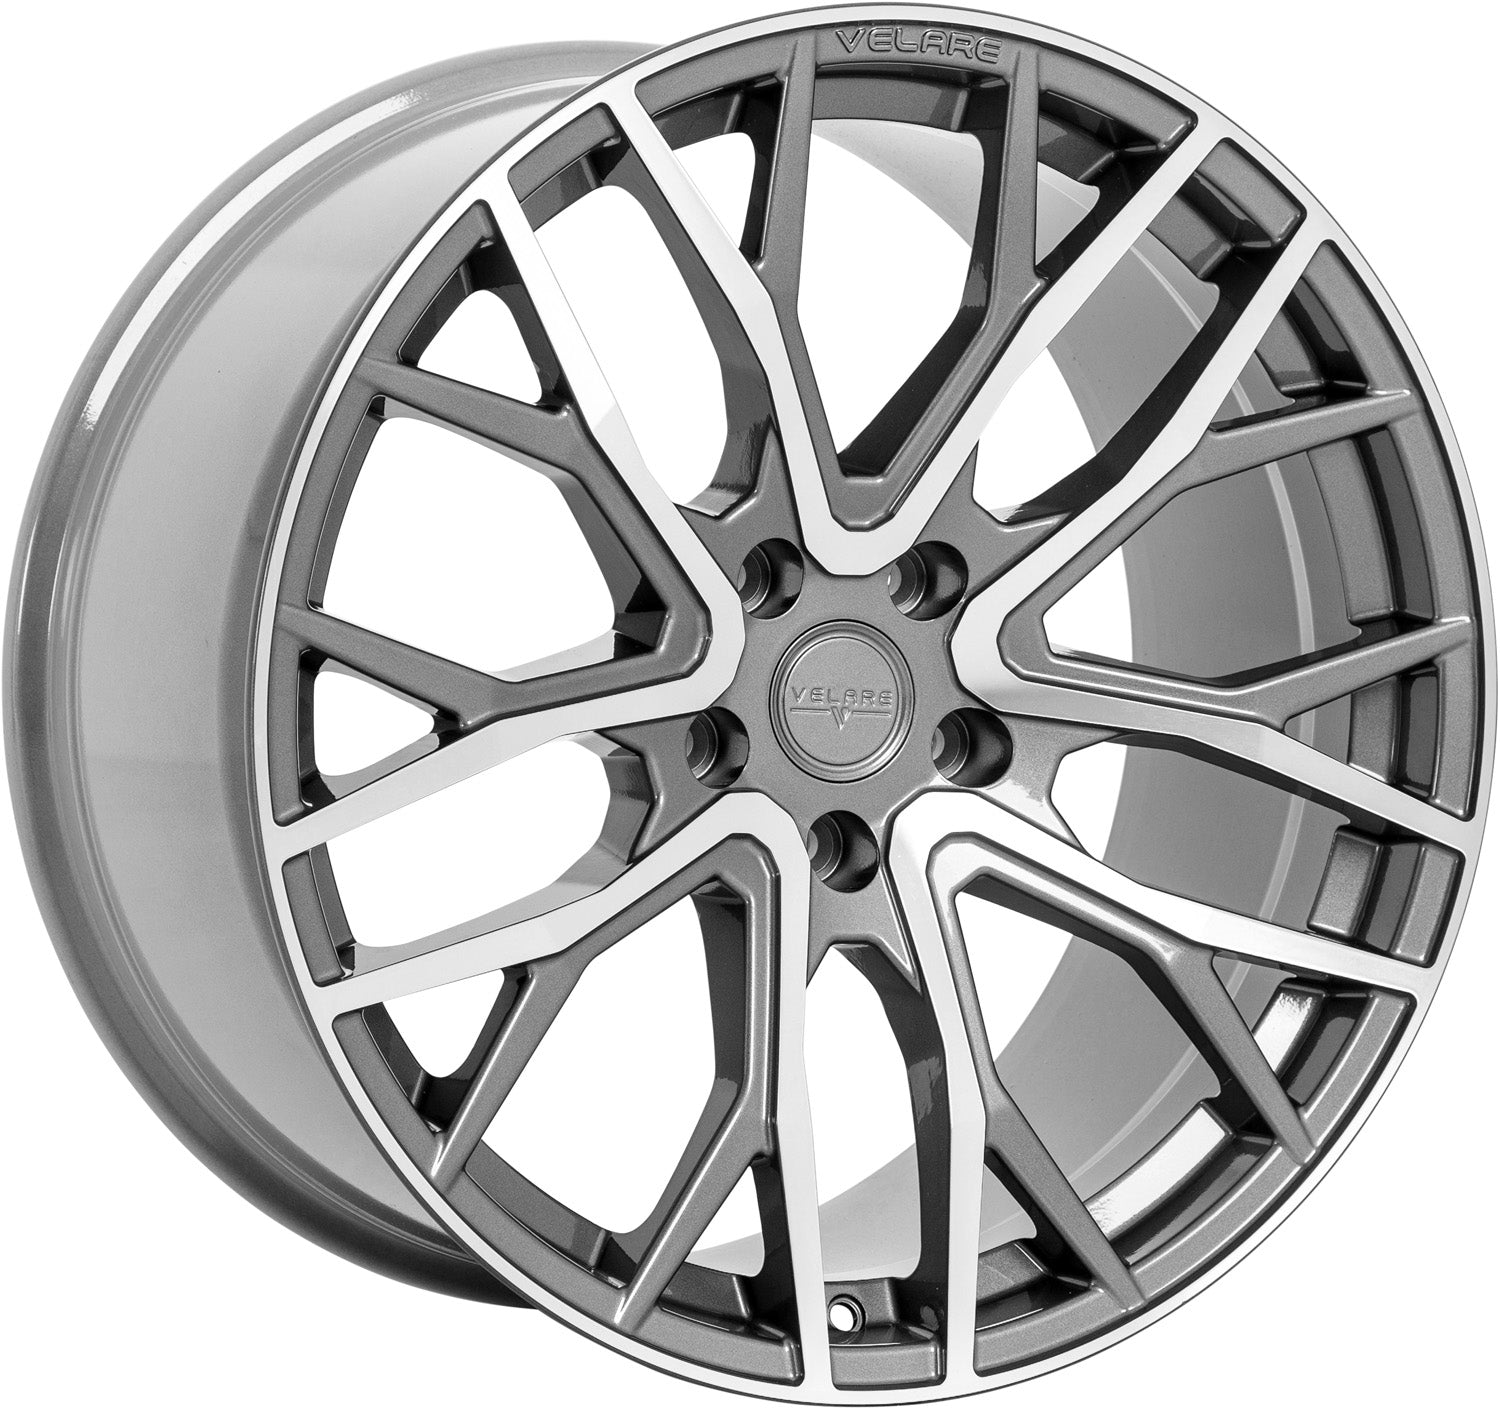 VLR08 Wheel and Tyre Package-Alloy wheels-Velare- DC Leisure